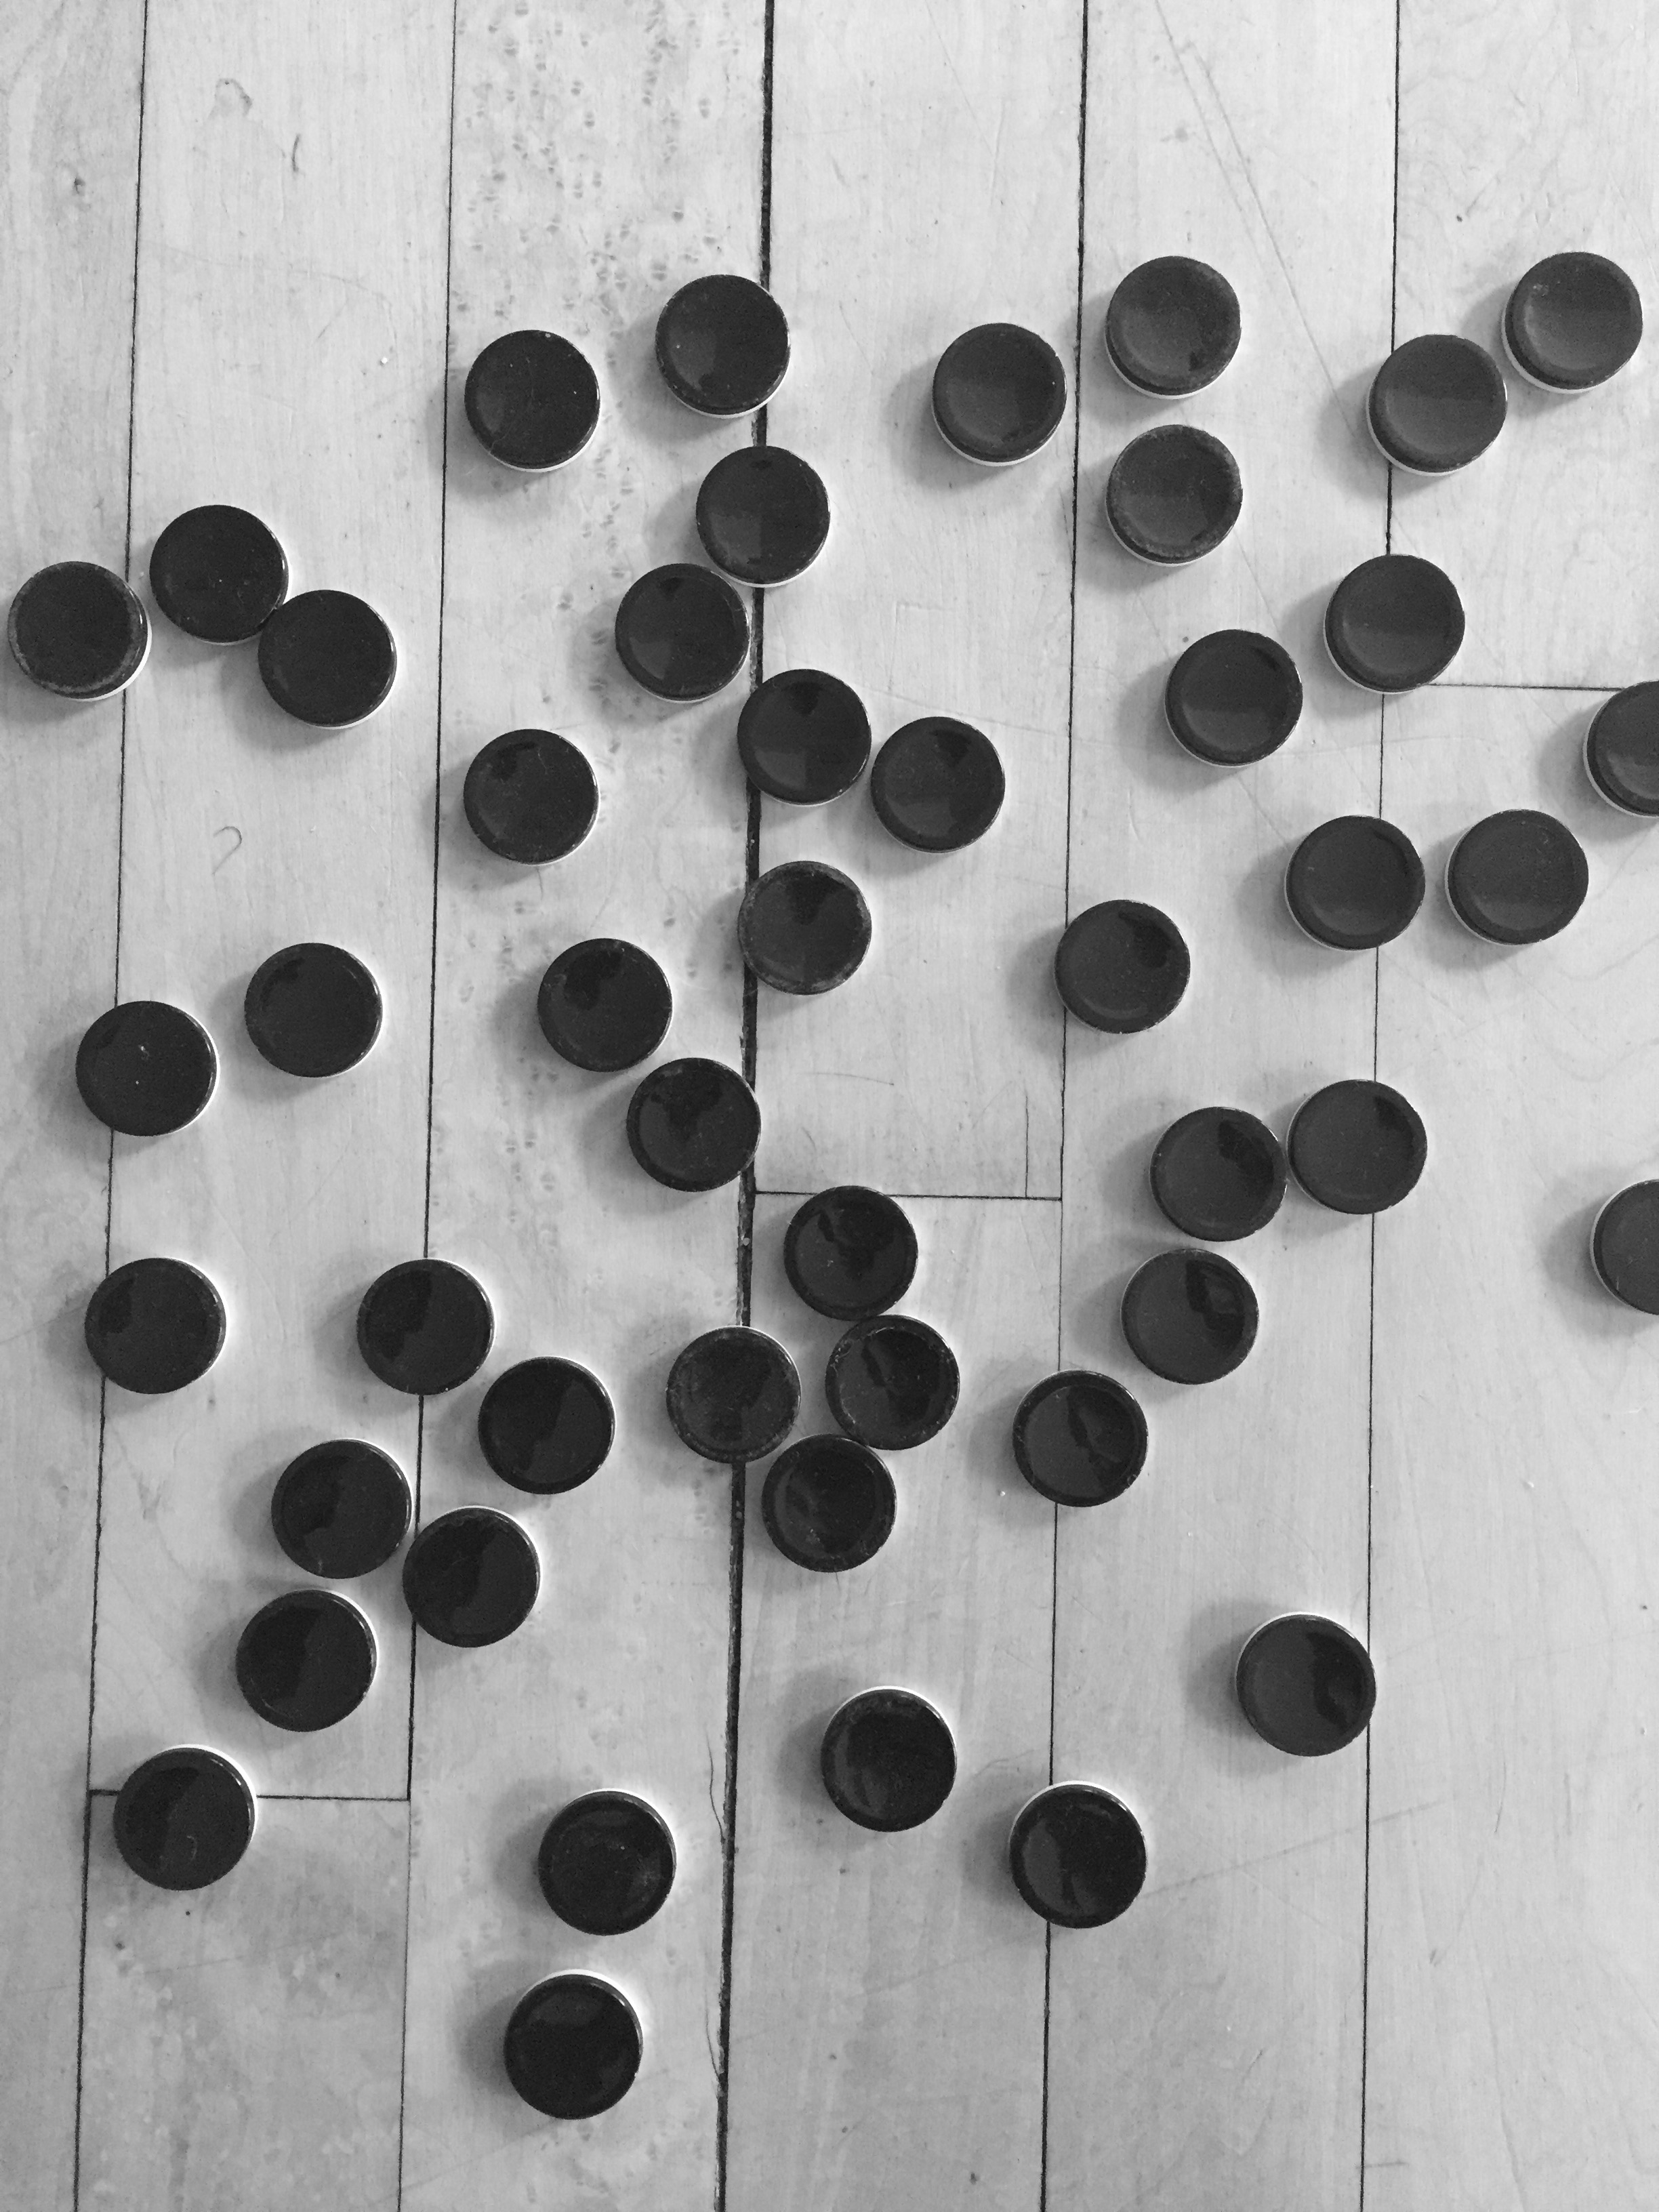 Black and white photo of black bottle caps on a wooden floor